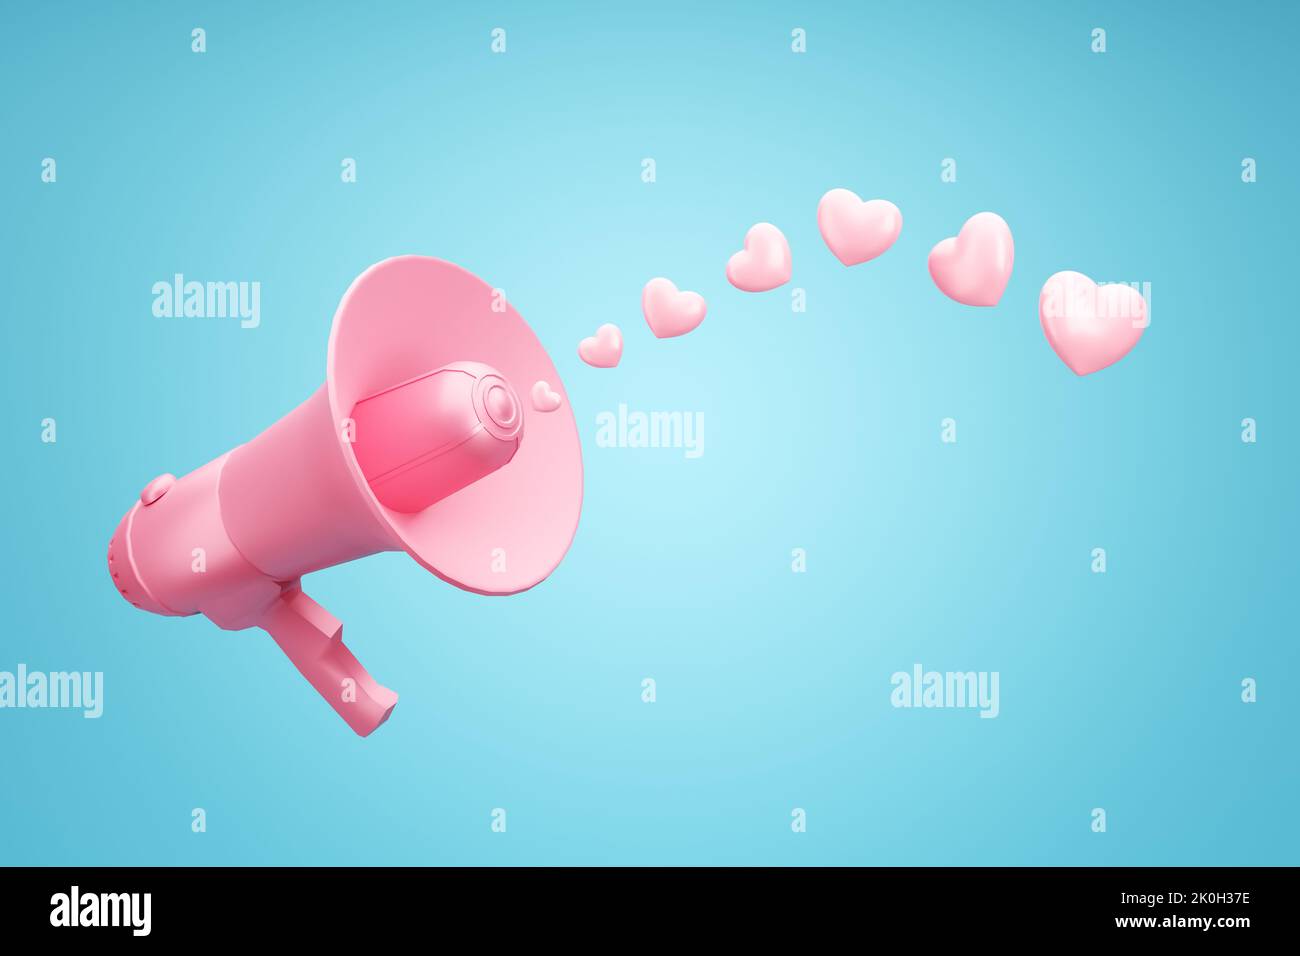 Announcement of love, romantic message, marriage proposal or valentines day celebration. Pink hearts spreading from a megaphone. 3D rendering. Stock Photo